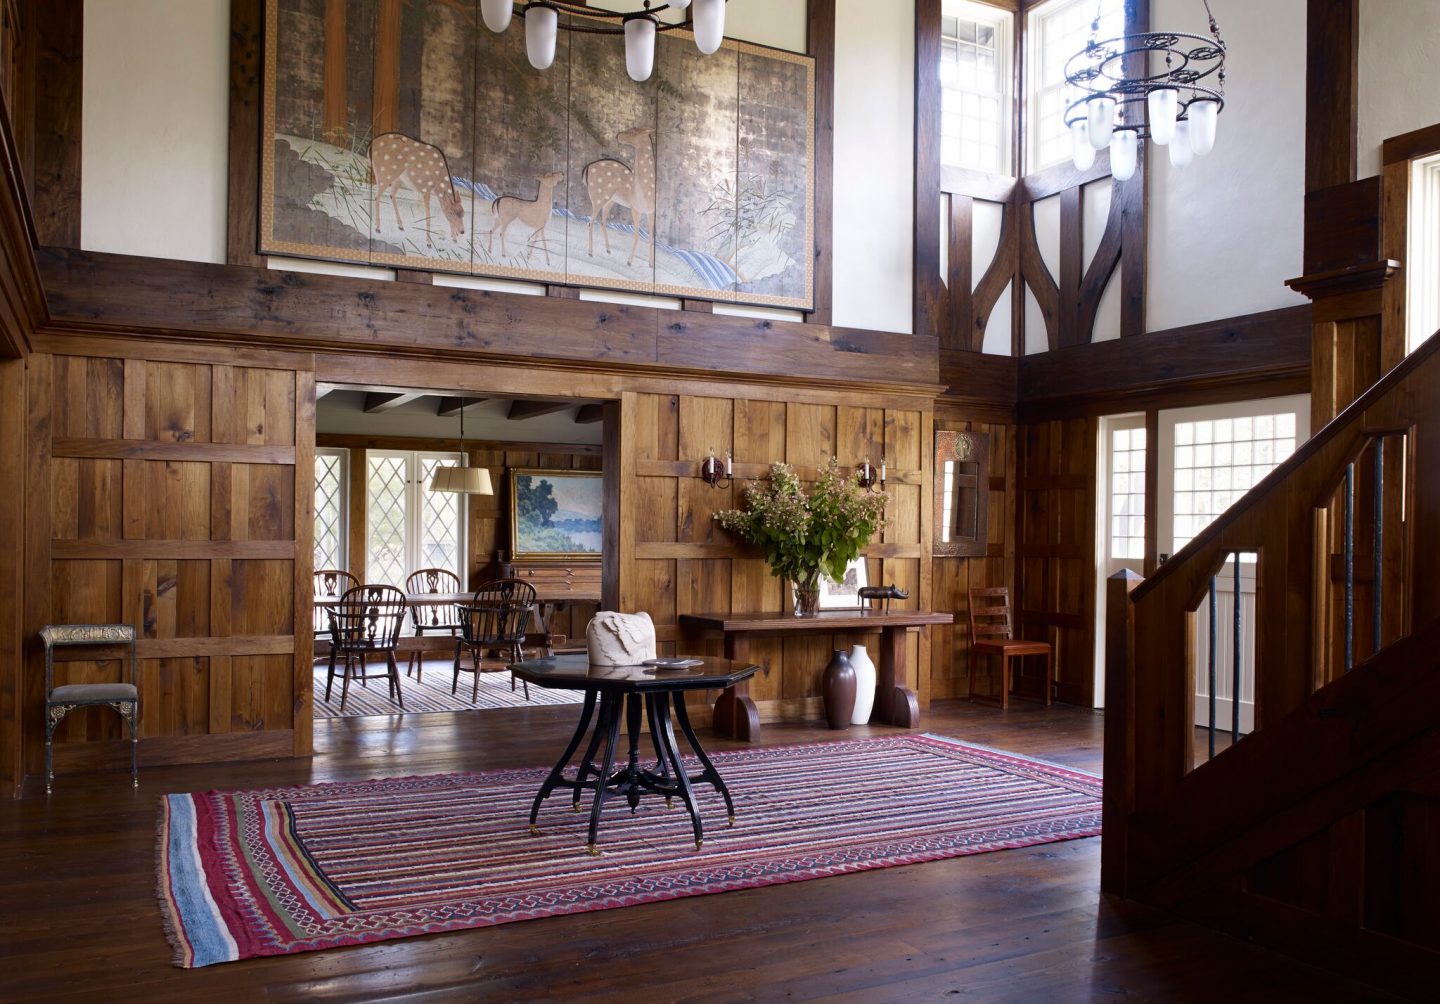 Handsome interior design inspiration from some of my favorite classic architects and designers of luxurious traditional homes and spaces. #traditionaldecor #interiordesign #classicdesign #classicarchitecture #homeideas #interiordesignideas #jeffreydungan #luxuryhomes